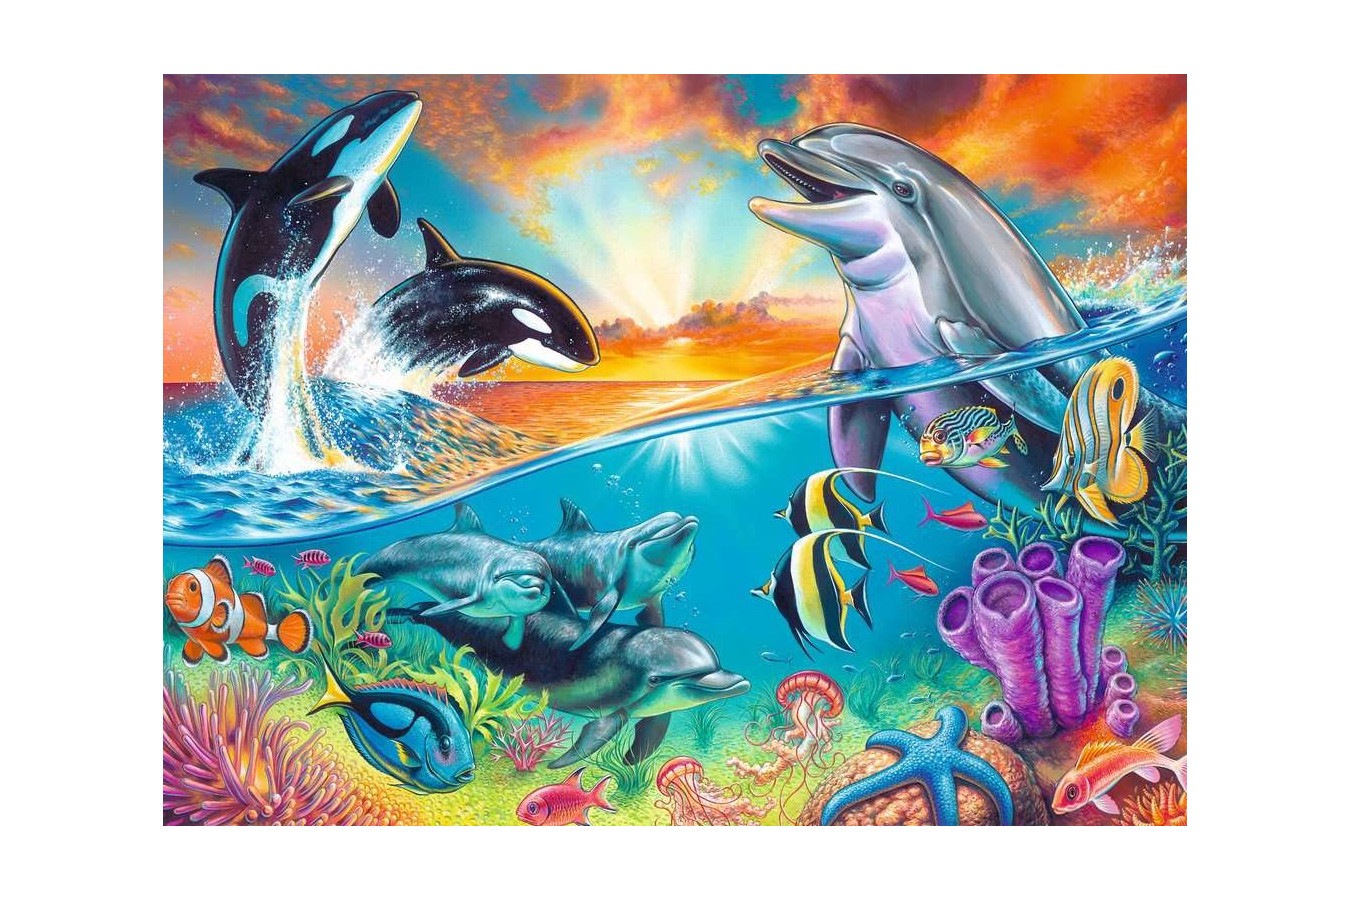 Puzzle Ravensburger - Animale Din Ocean, 200 piese (12900)